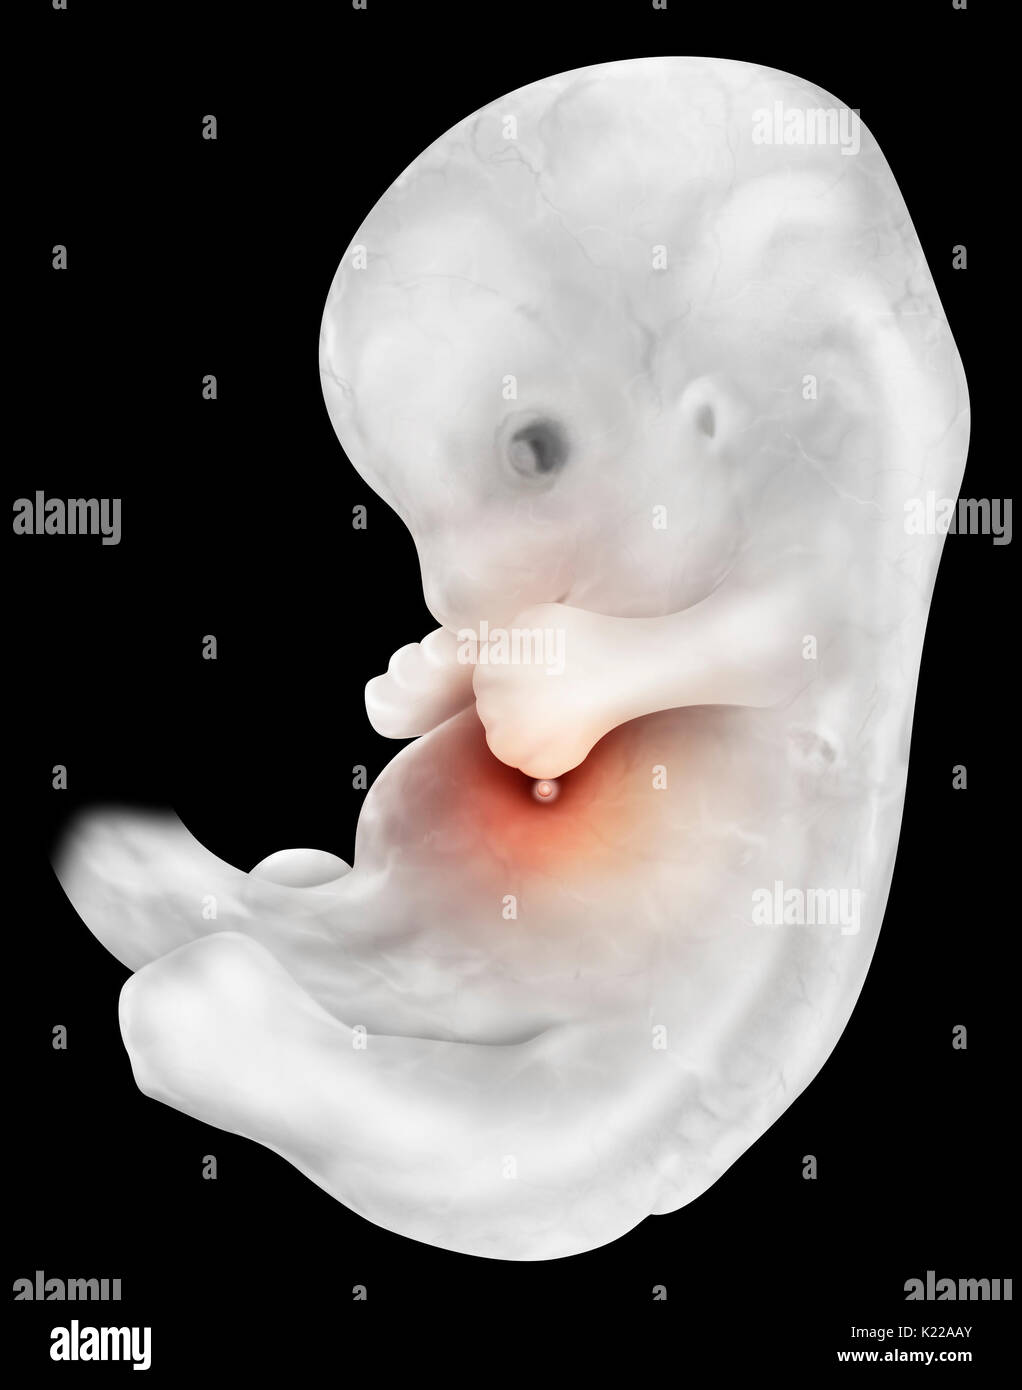 A six-week embryo measures almost 1⁄2 inch (13 mm) and weighs approximately 1.5 g. Its limbs are already differentiated and its face is beginning to have a human appearance. Stock Photo